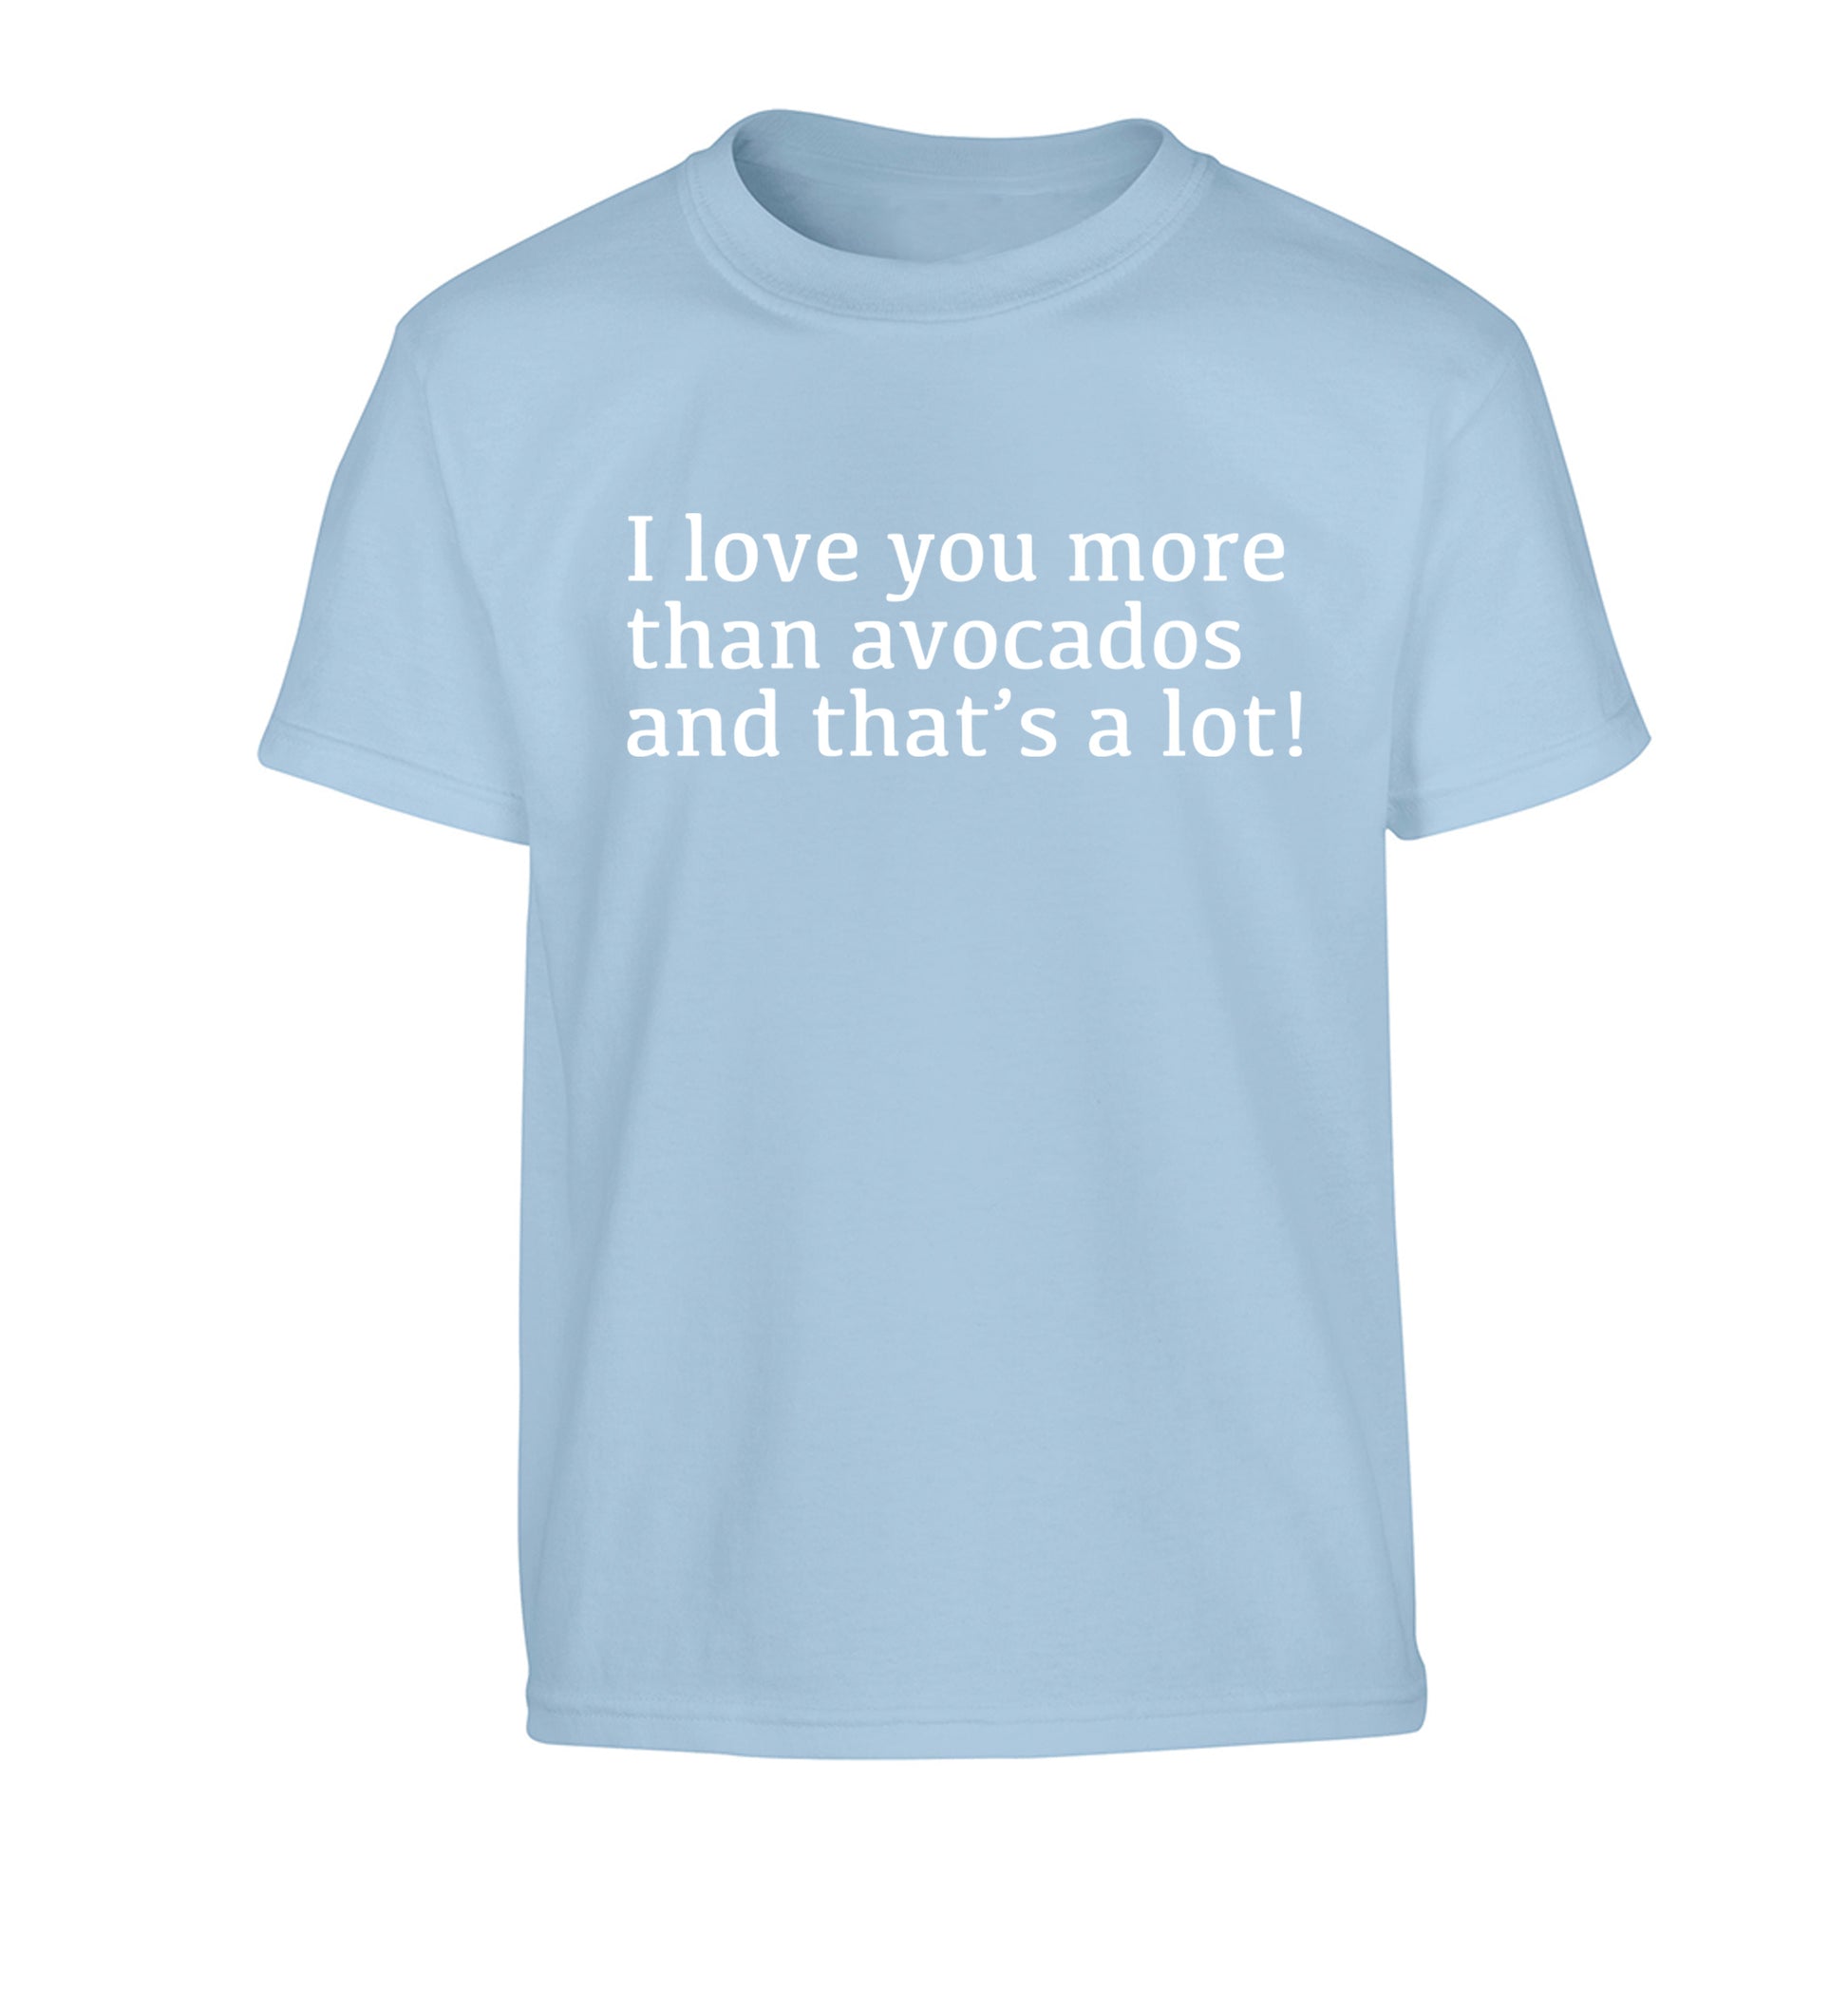 I love you more than avocados and that's a lot Children's light blue Tshirt 12-14 Years